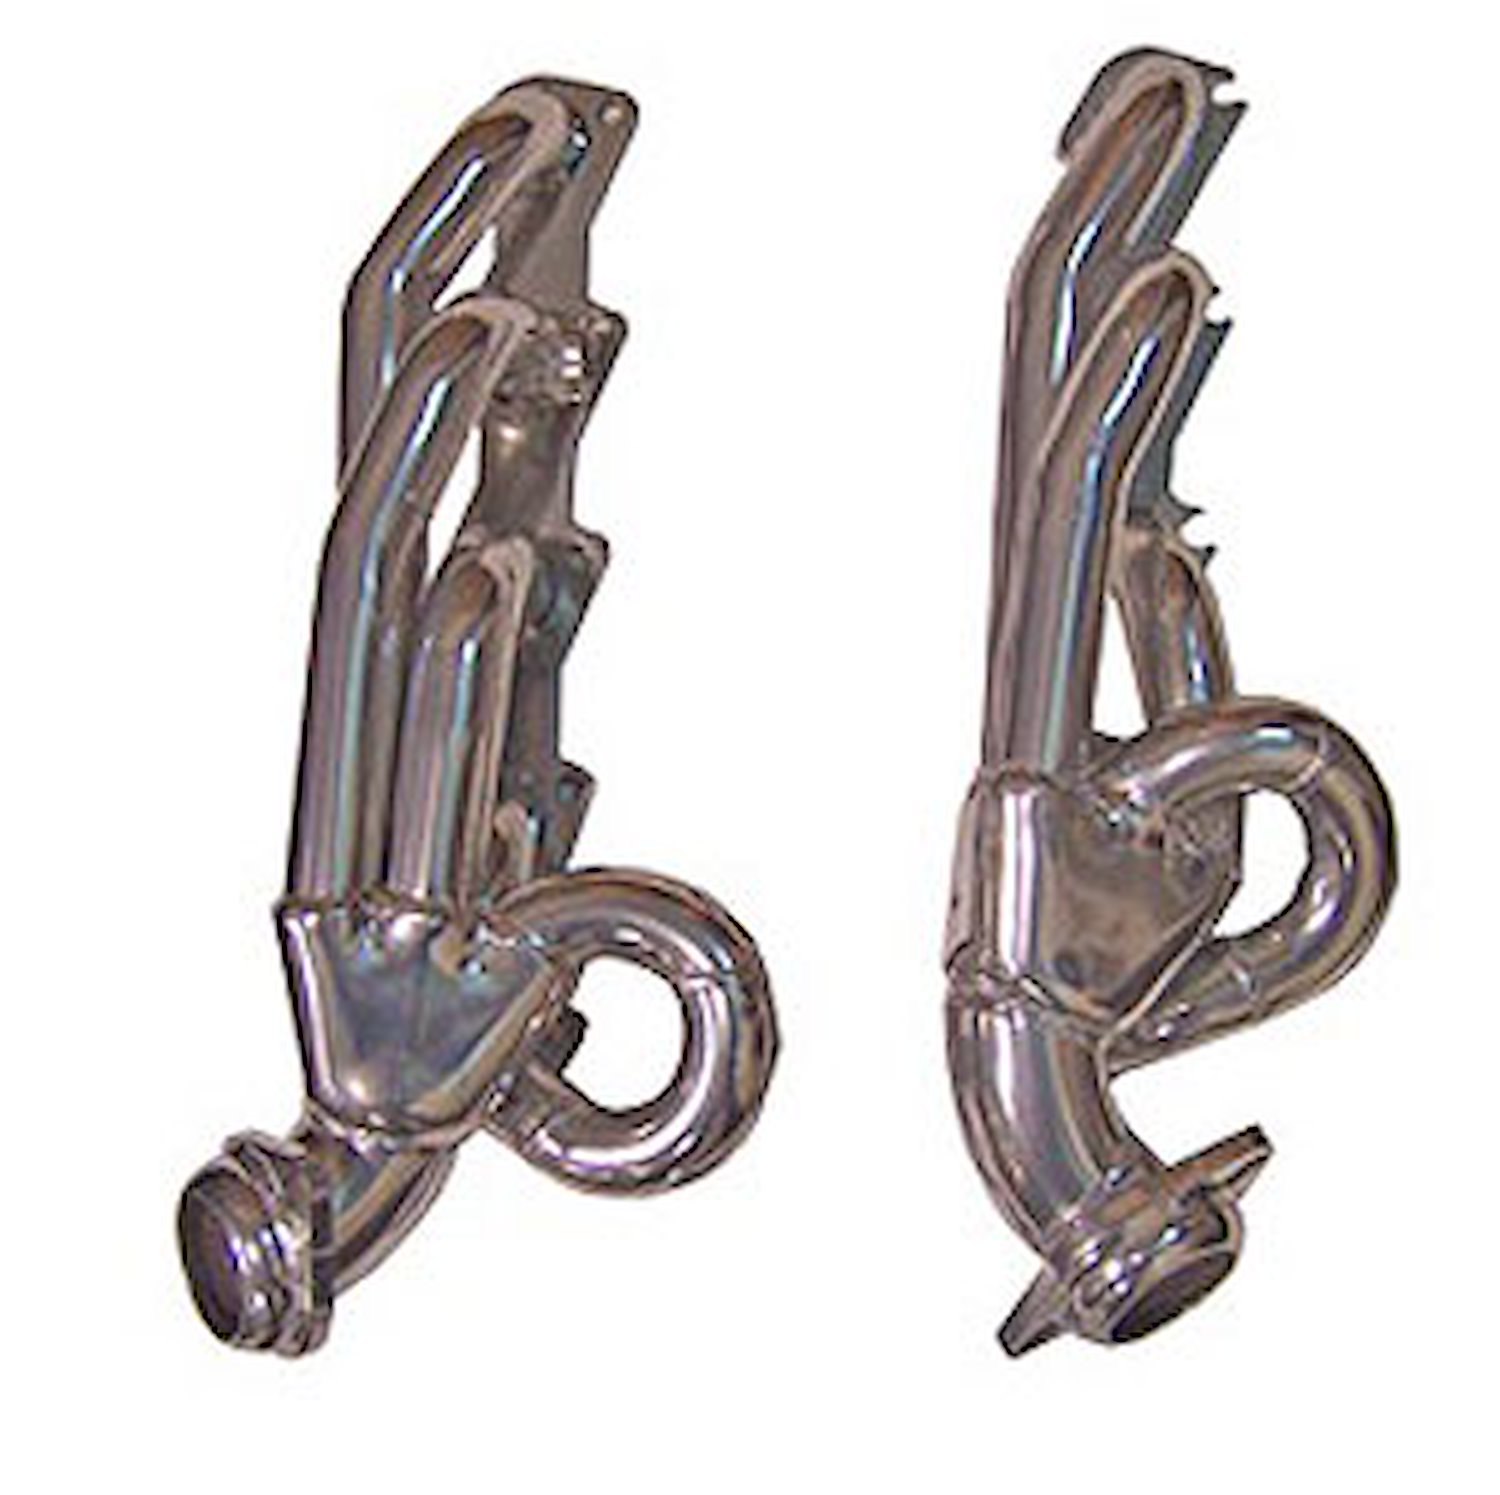 Stainless Steel Truck Headers 1999-05 Excursion